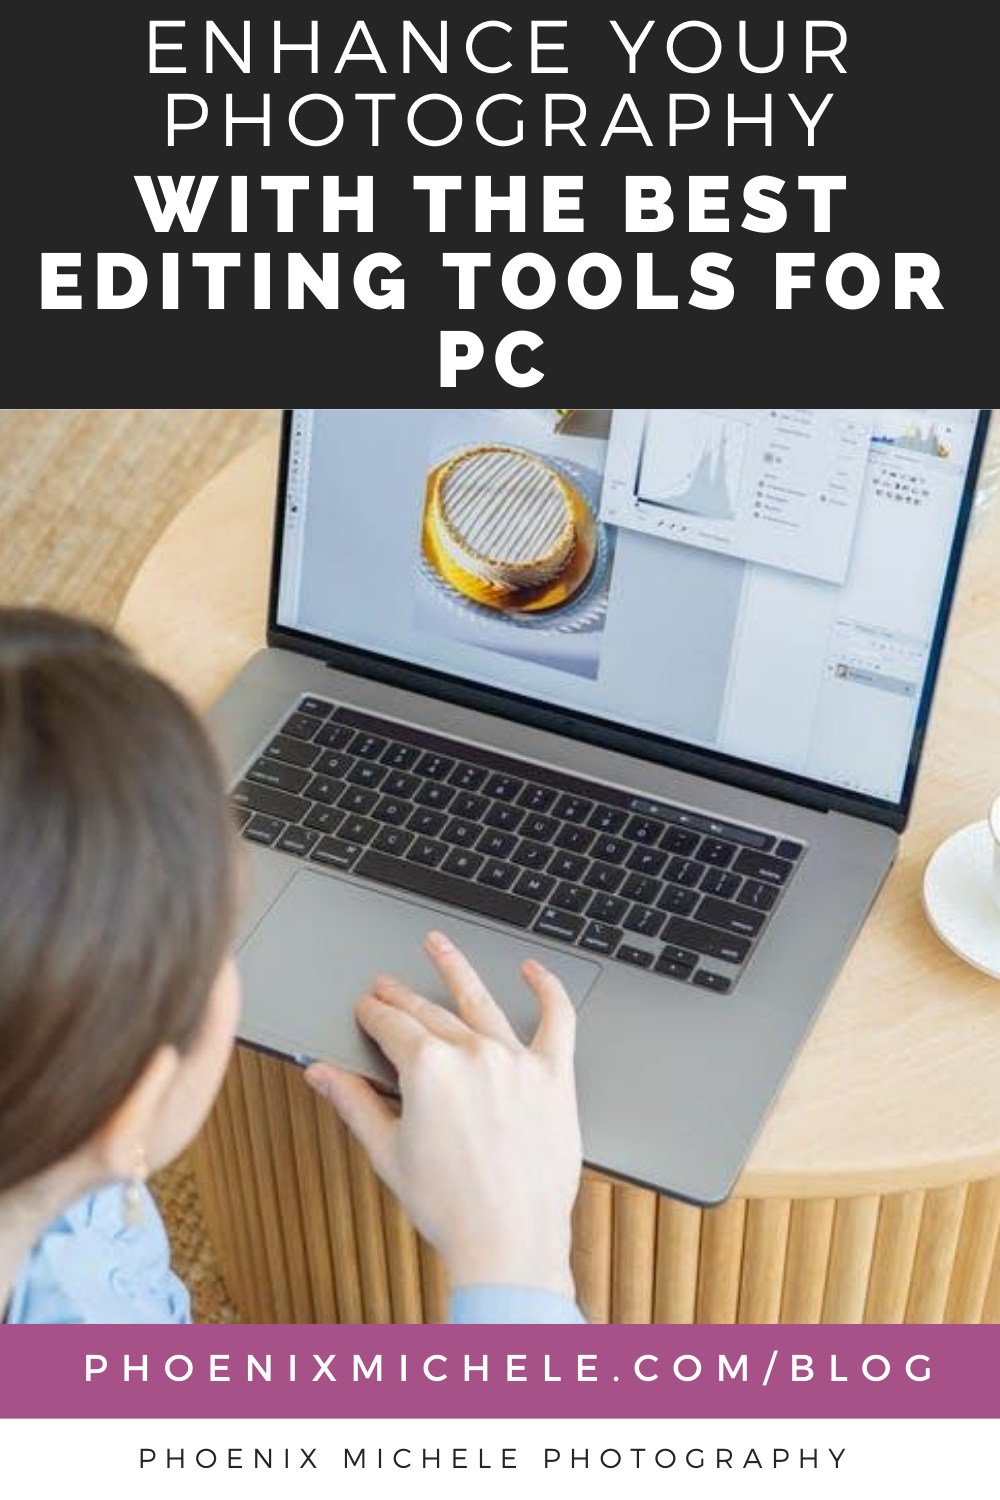 Editing tools for photography